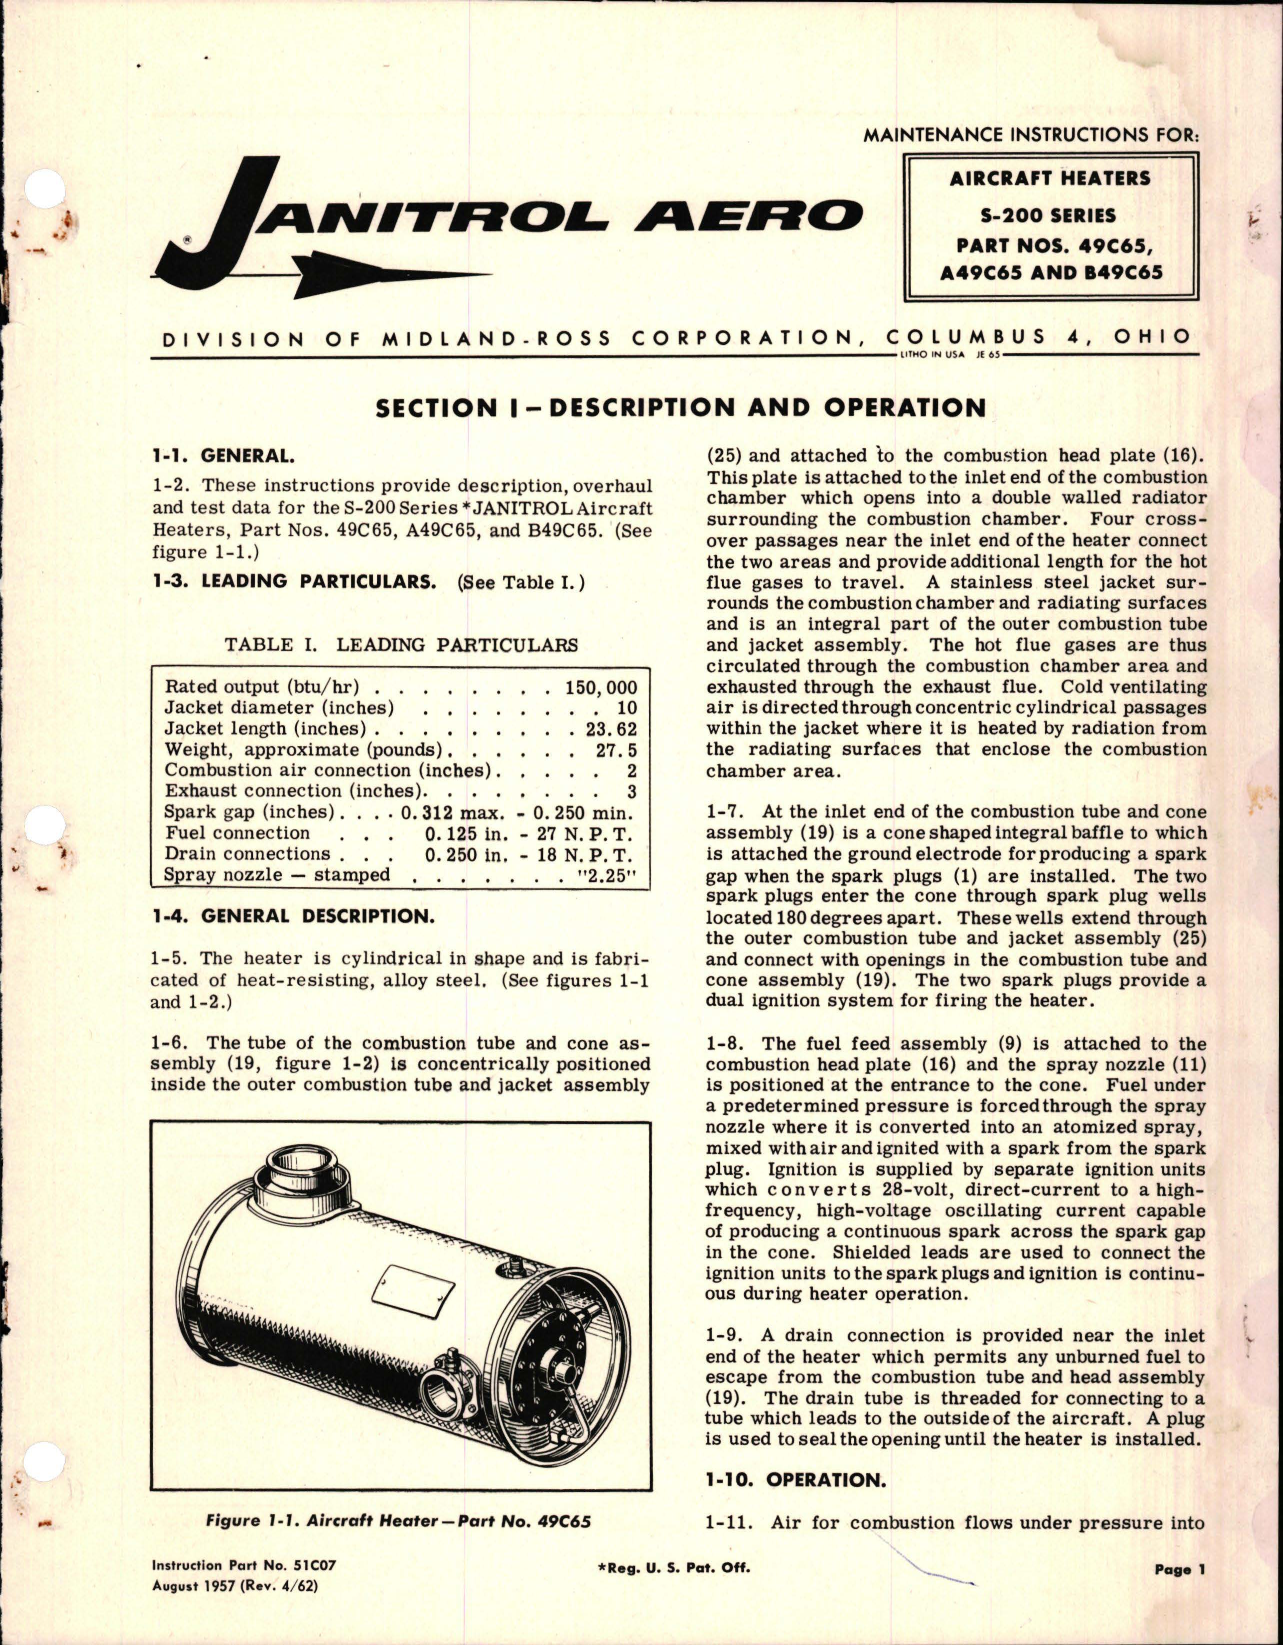 Sample page 1 from AirCorps Library document: Maintenance Instructions for Aircraft Heaters - S-200 Series - Parts 49C65, A49C65, and B49C65